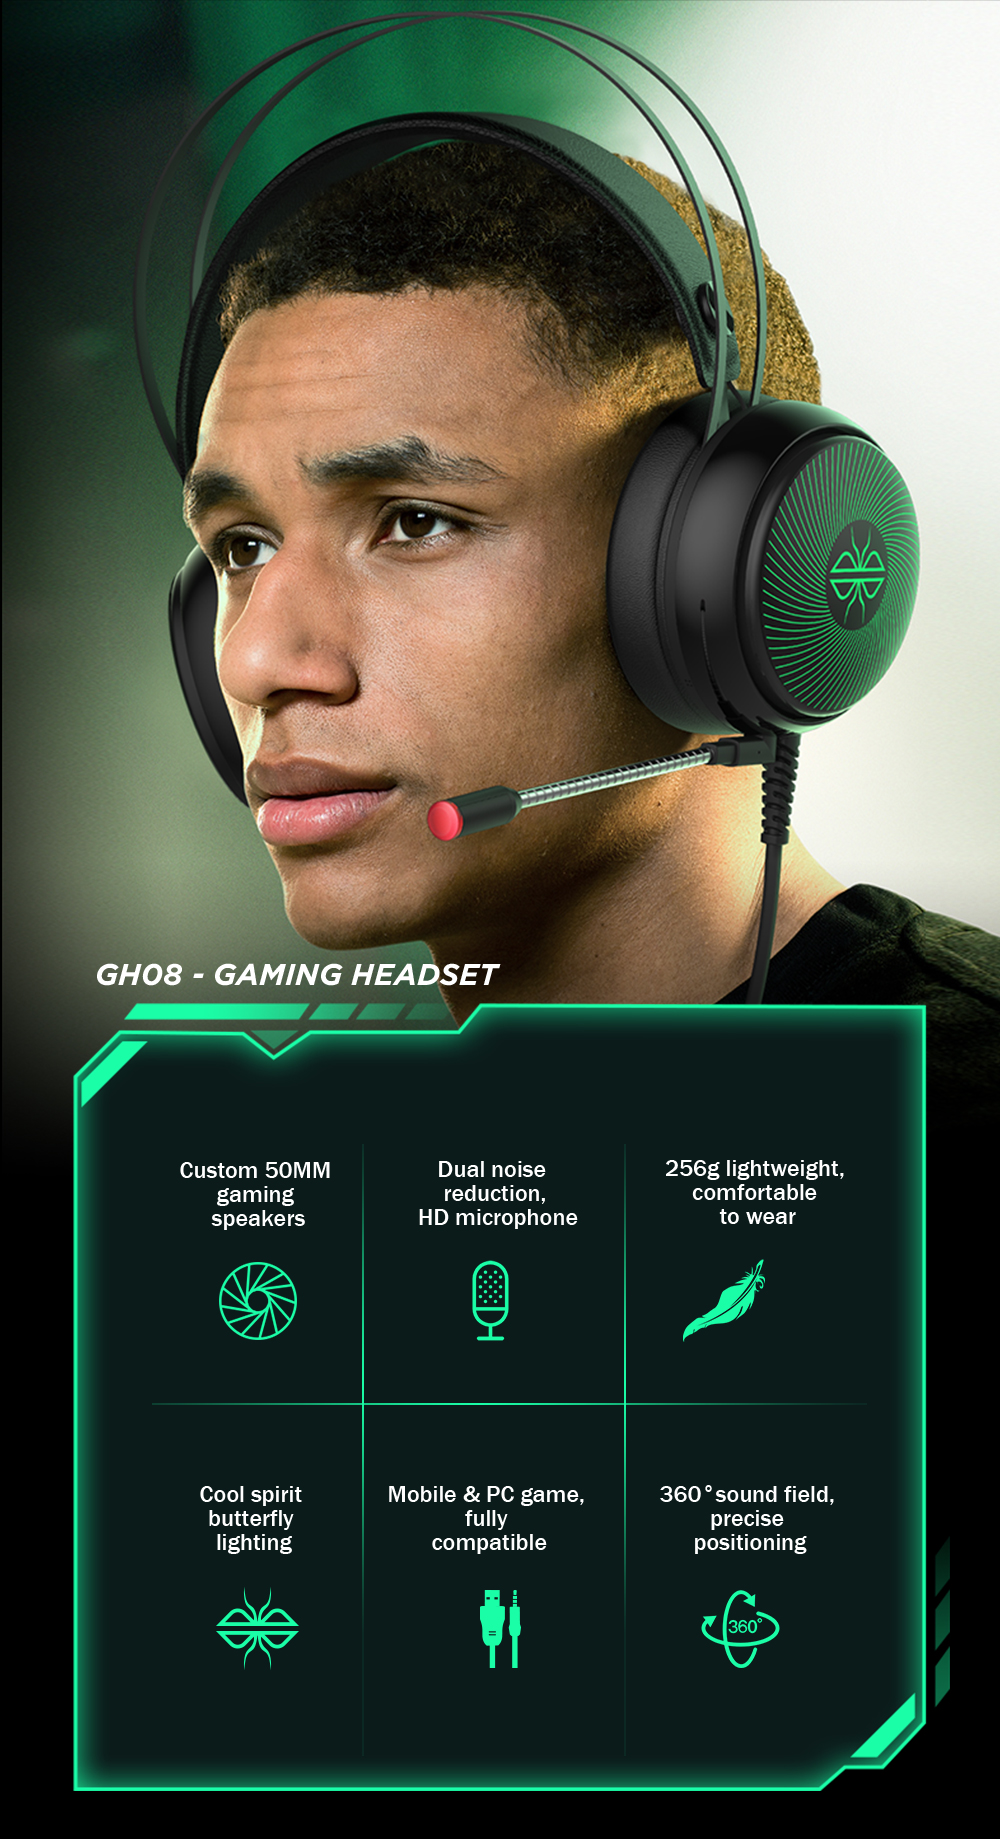 DACOM-GH08-E-sport-Gaming-Headset-35mm-Wired-Gamer-Headphone-with-LED-Light-HD-Mic-Stereo-Sound-for--1801871-2